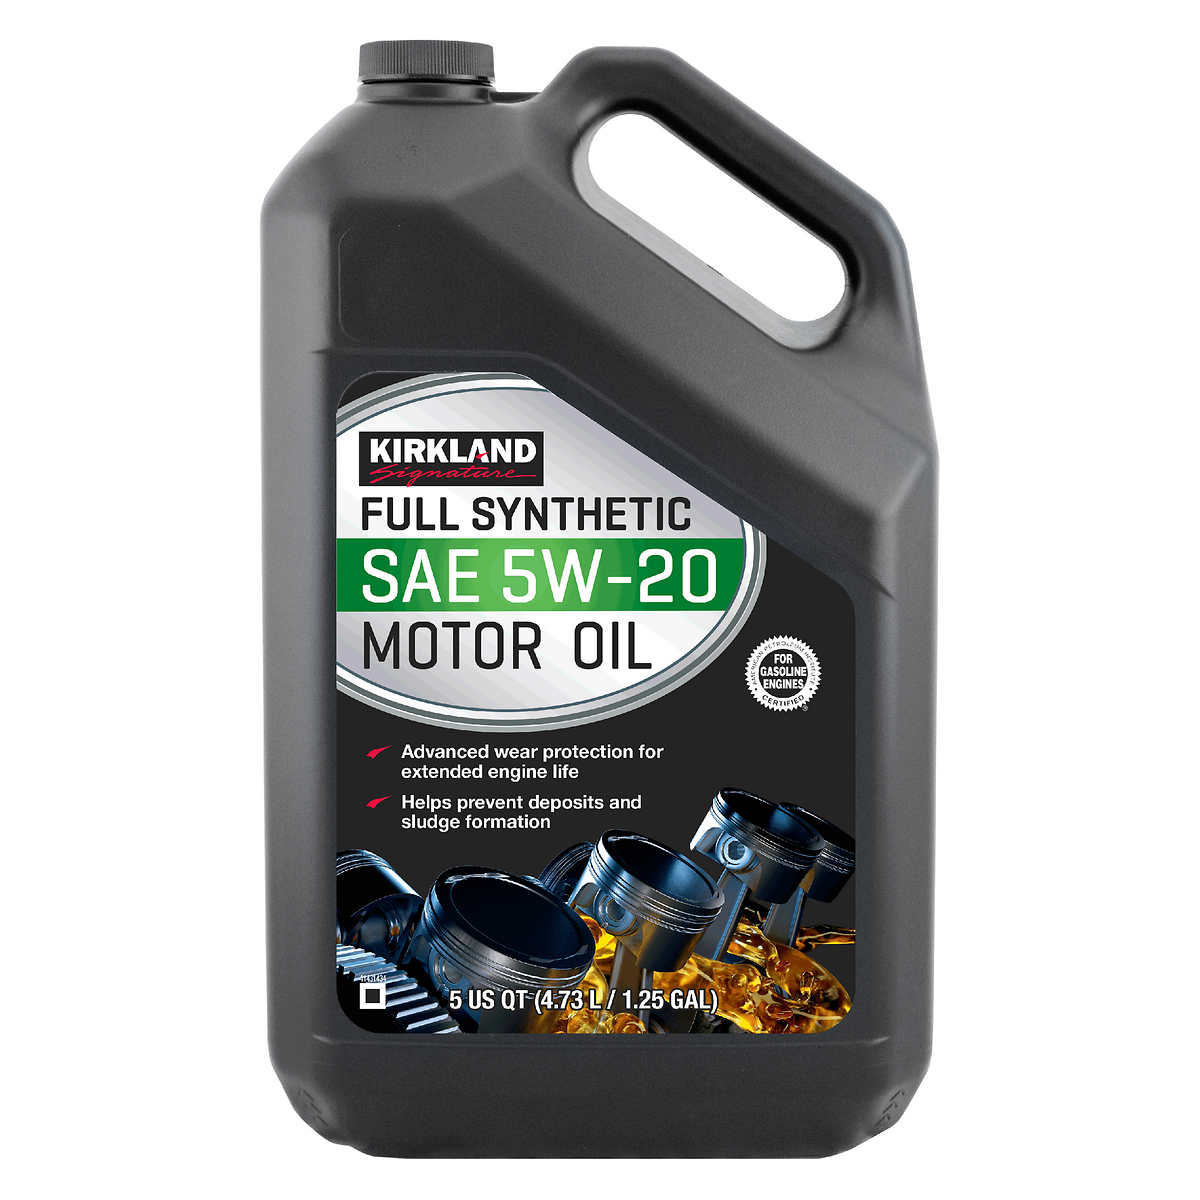 NAPA Auto Parts Canada - Engine Degreaser quickly lifts grease